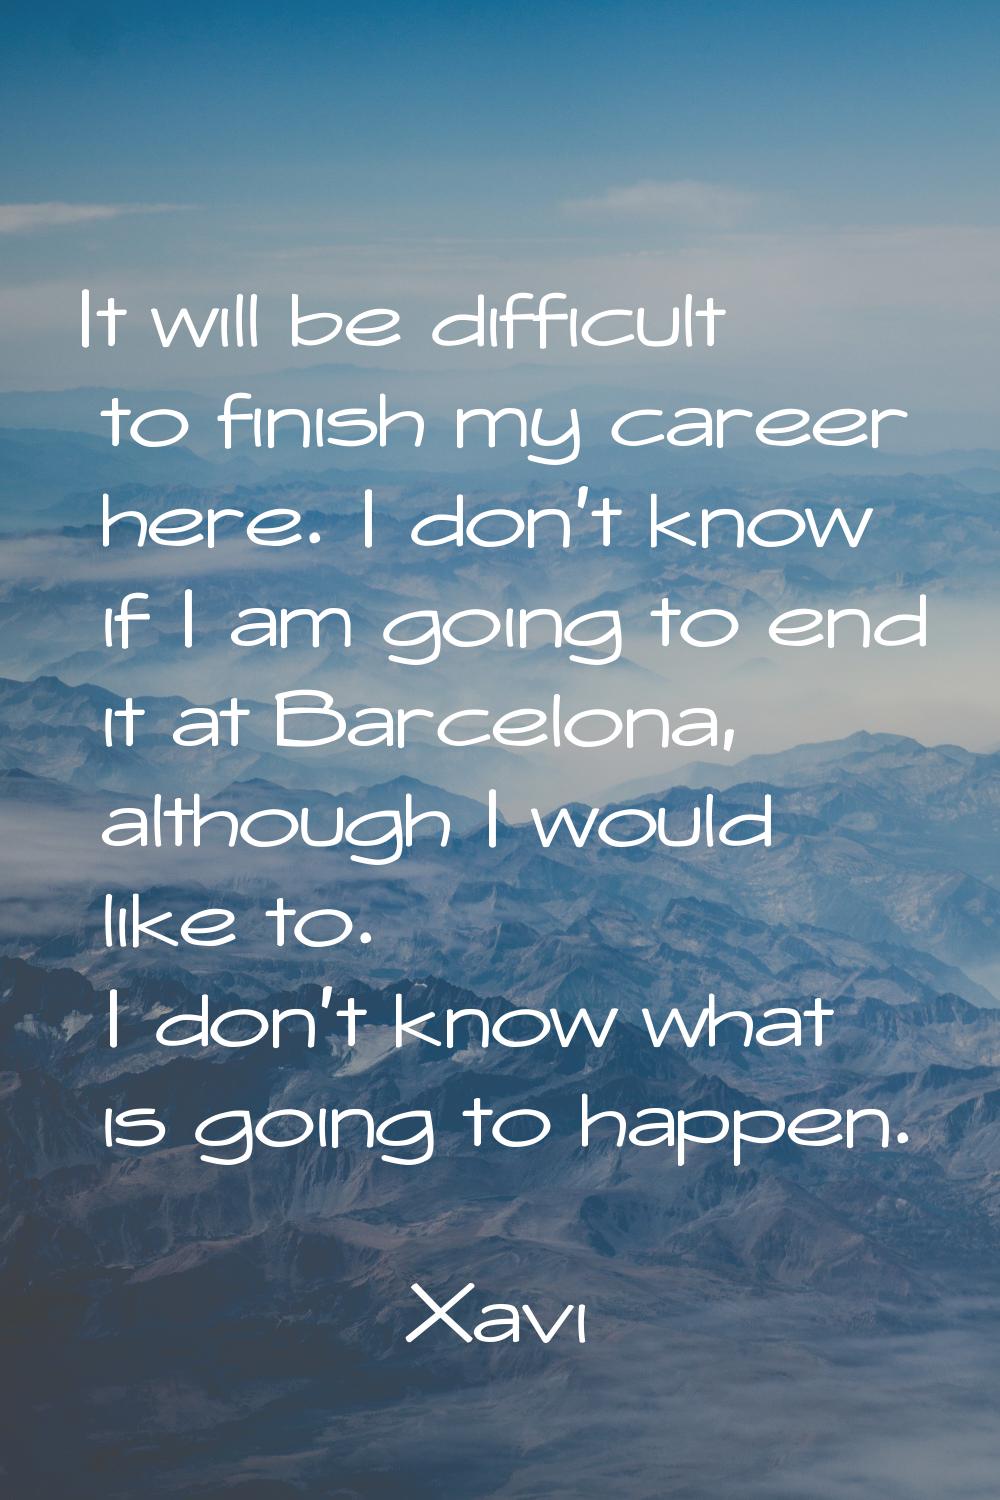 It will be difficult to finish my career here. I don't know if I am going to end it at Barcelona, a